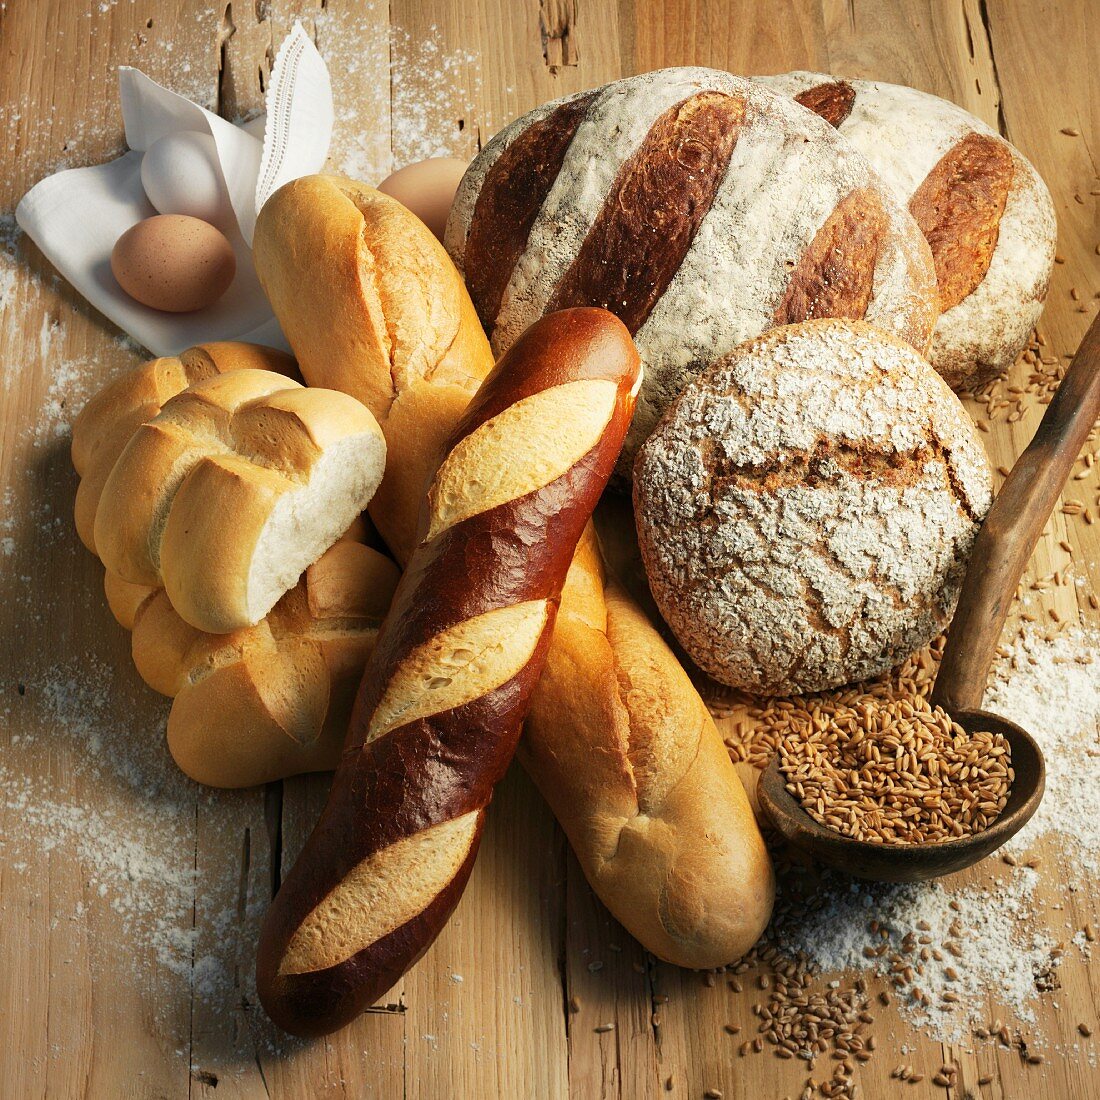 Assorted types of bread on a wooden surface